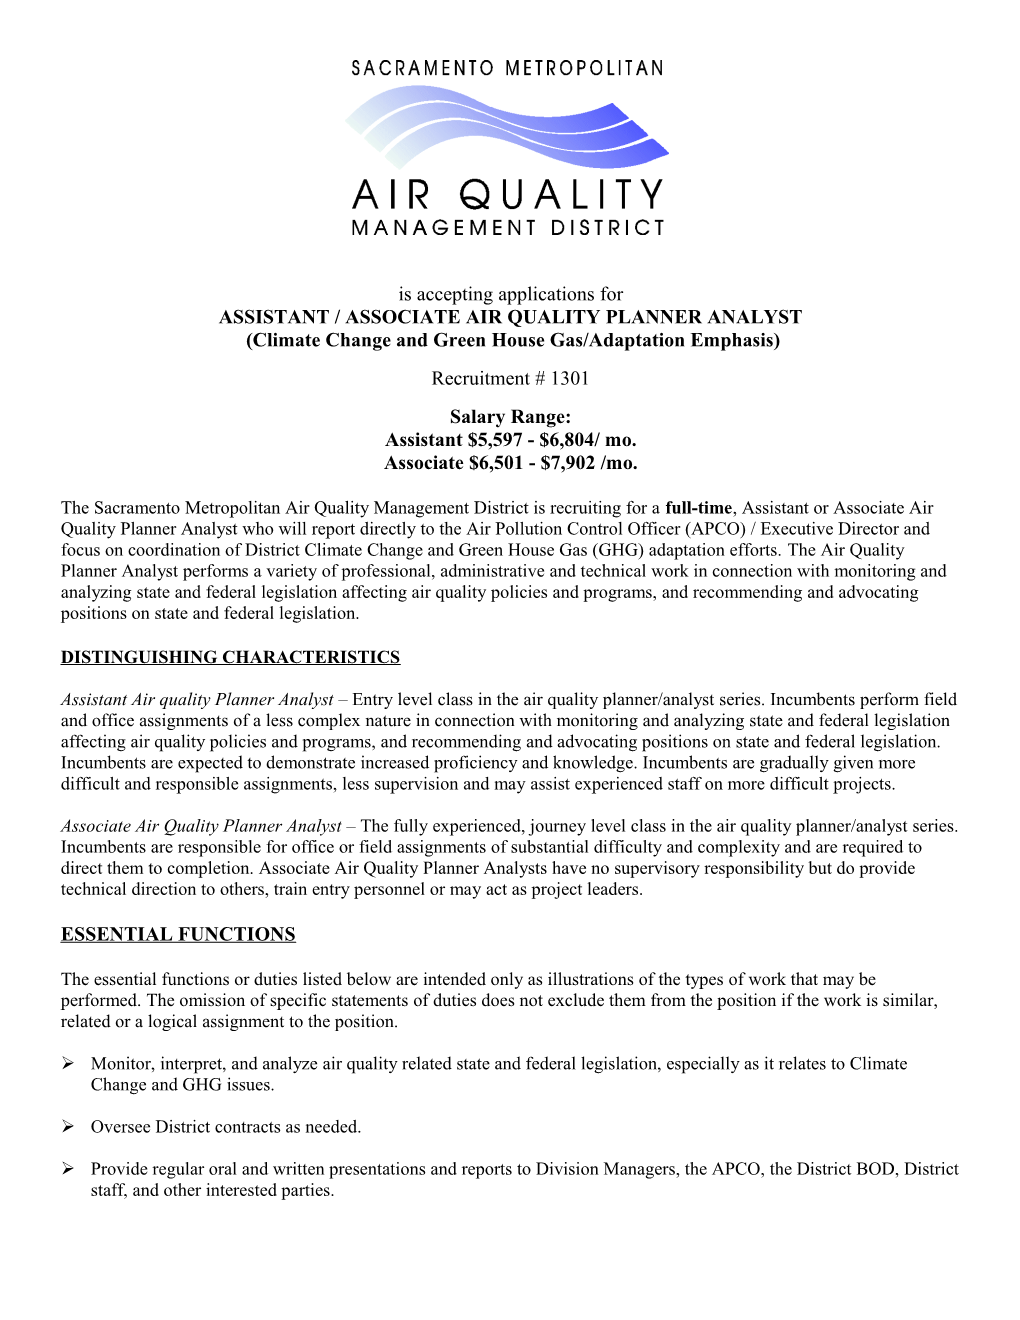 Assistant / Associate Air Quality Planner Analyst